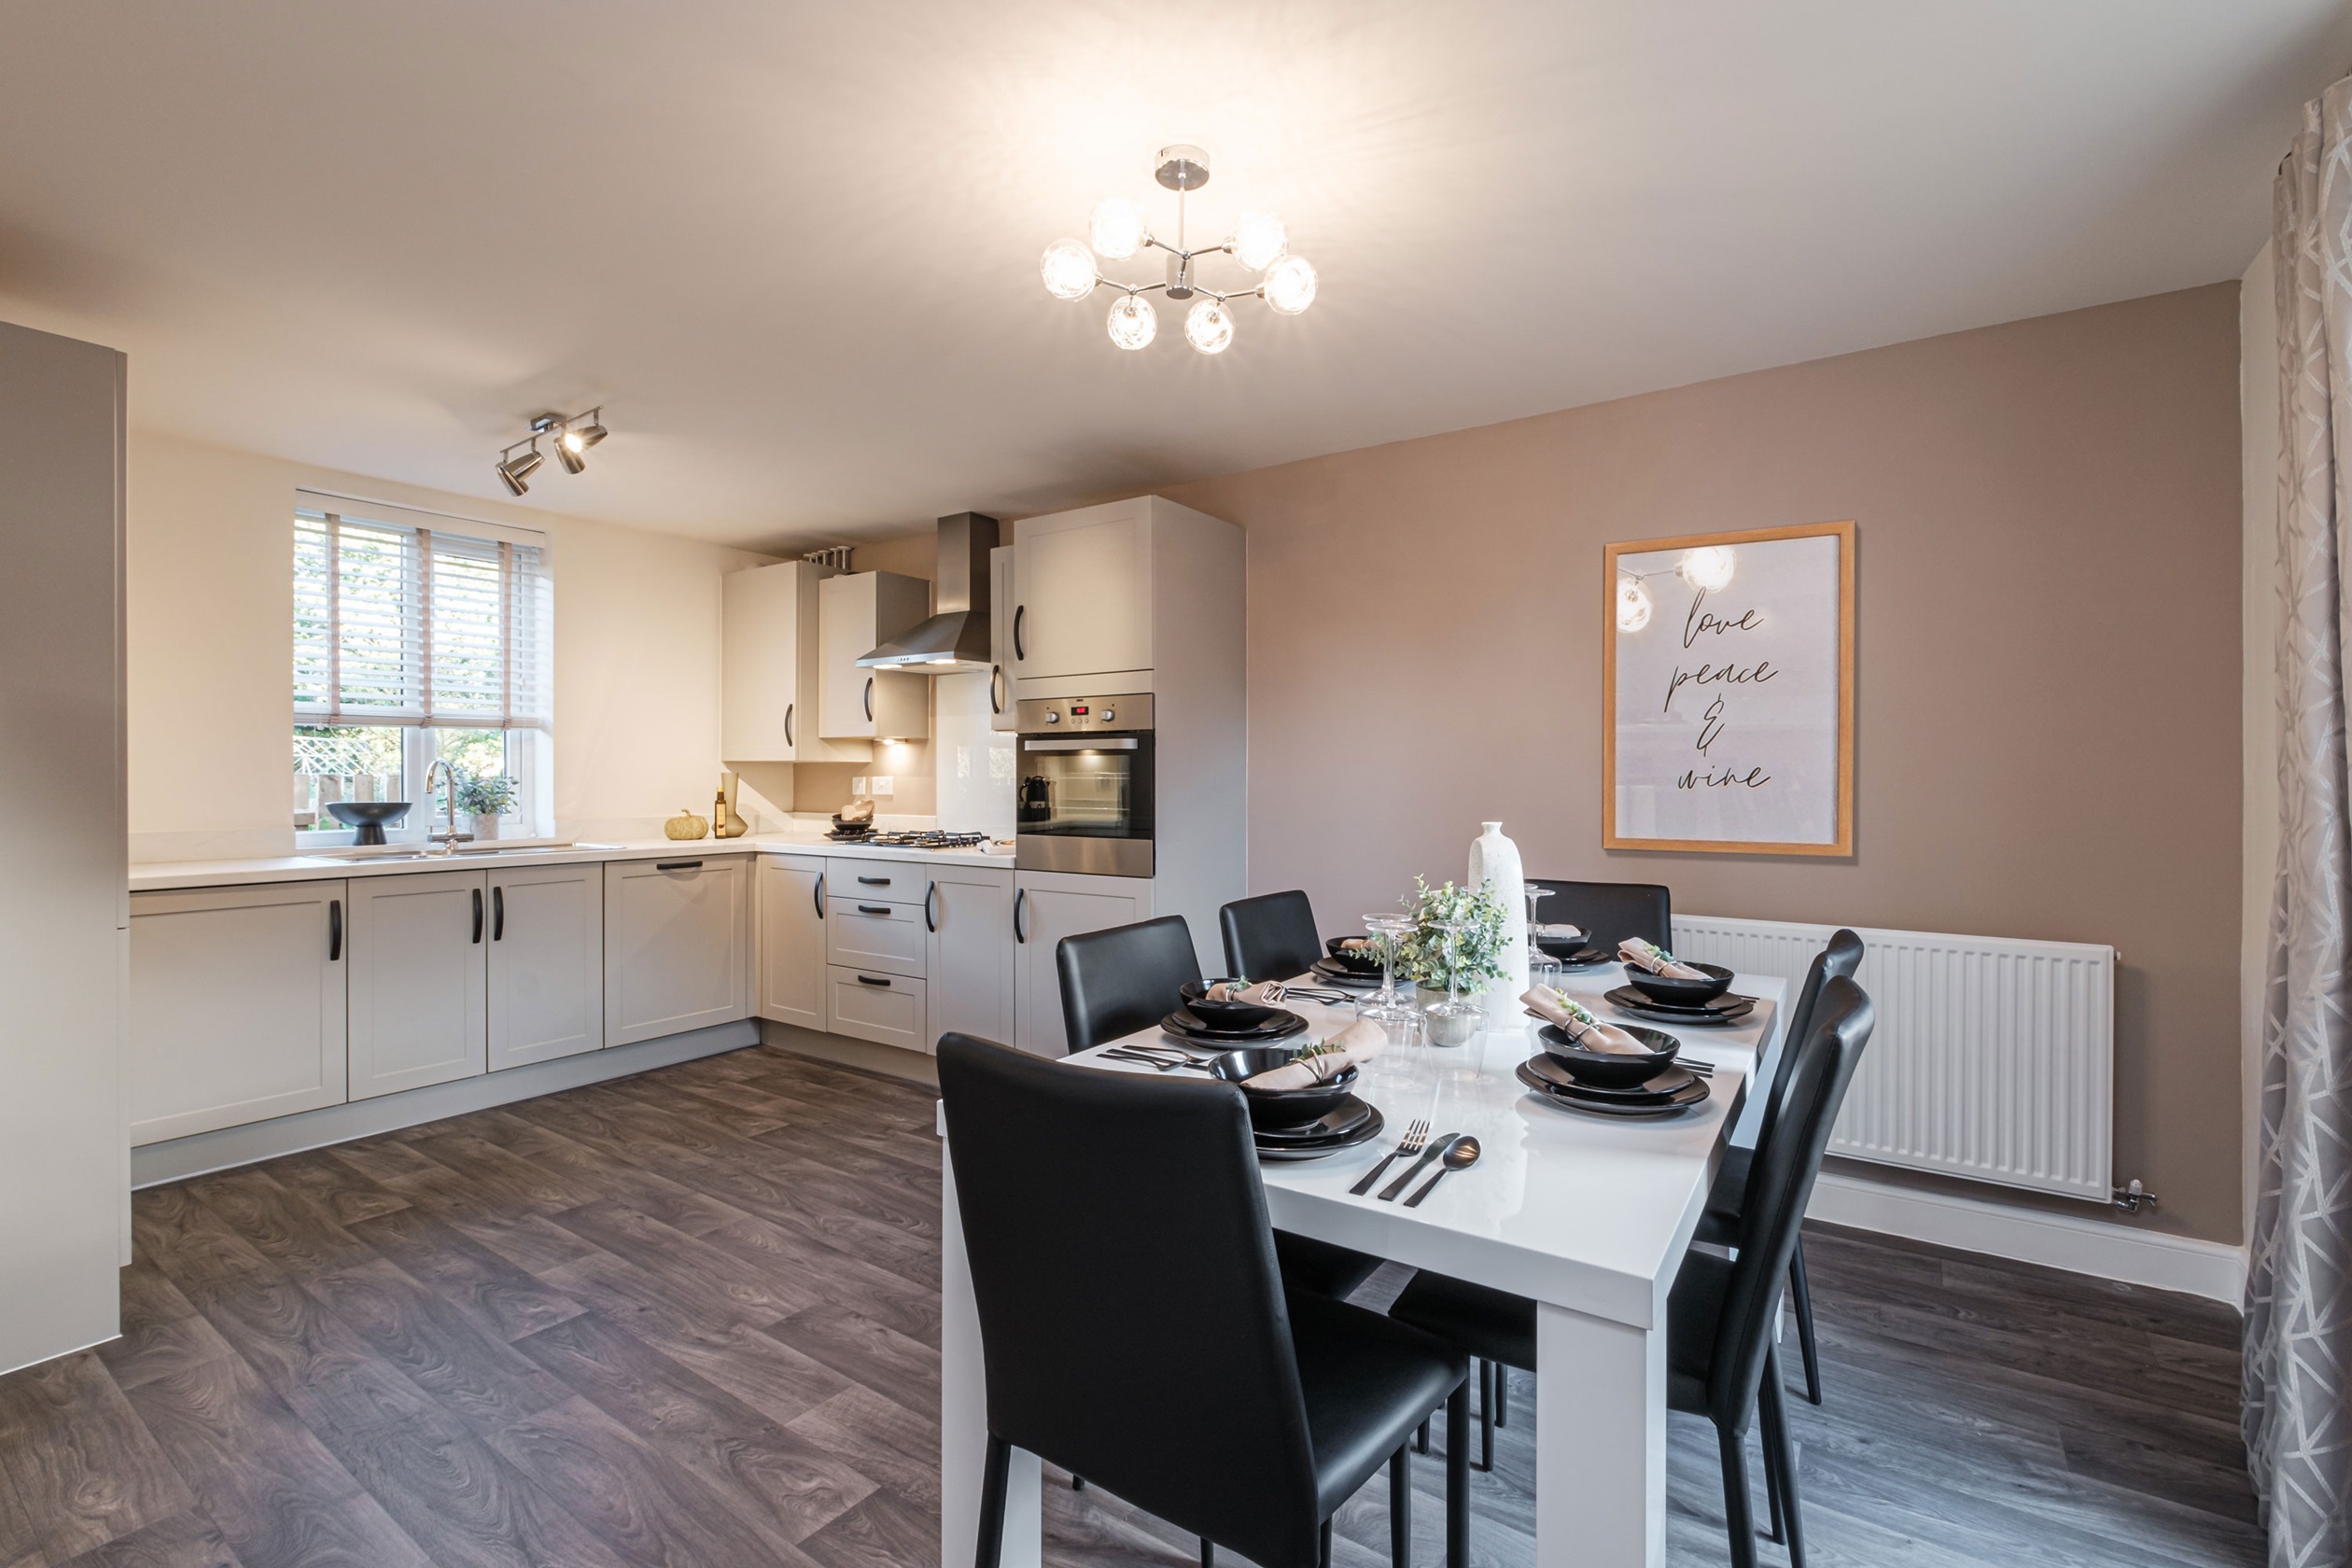 Property 3 of 10. Interior View Of Kitchen Diner In Our Lutterworth 3 Bedroom Home